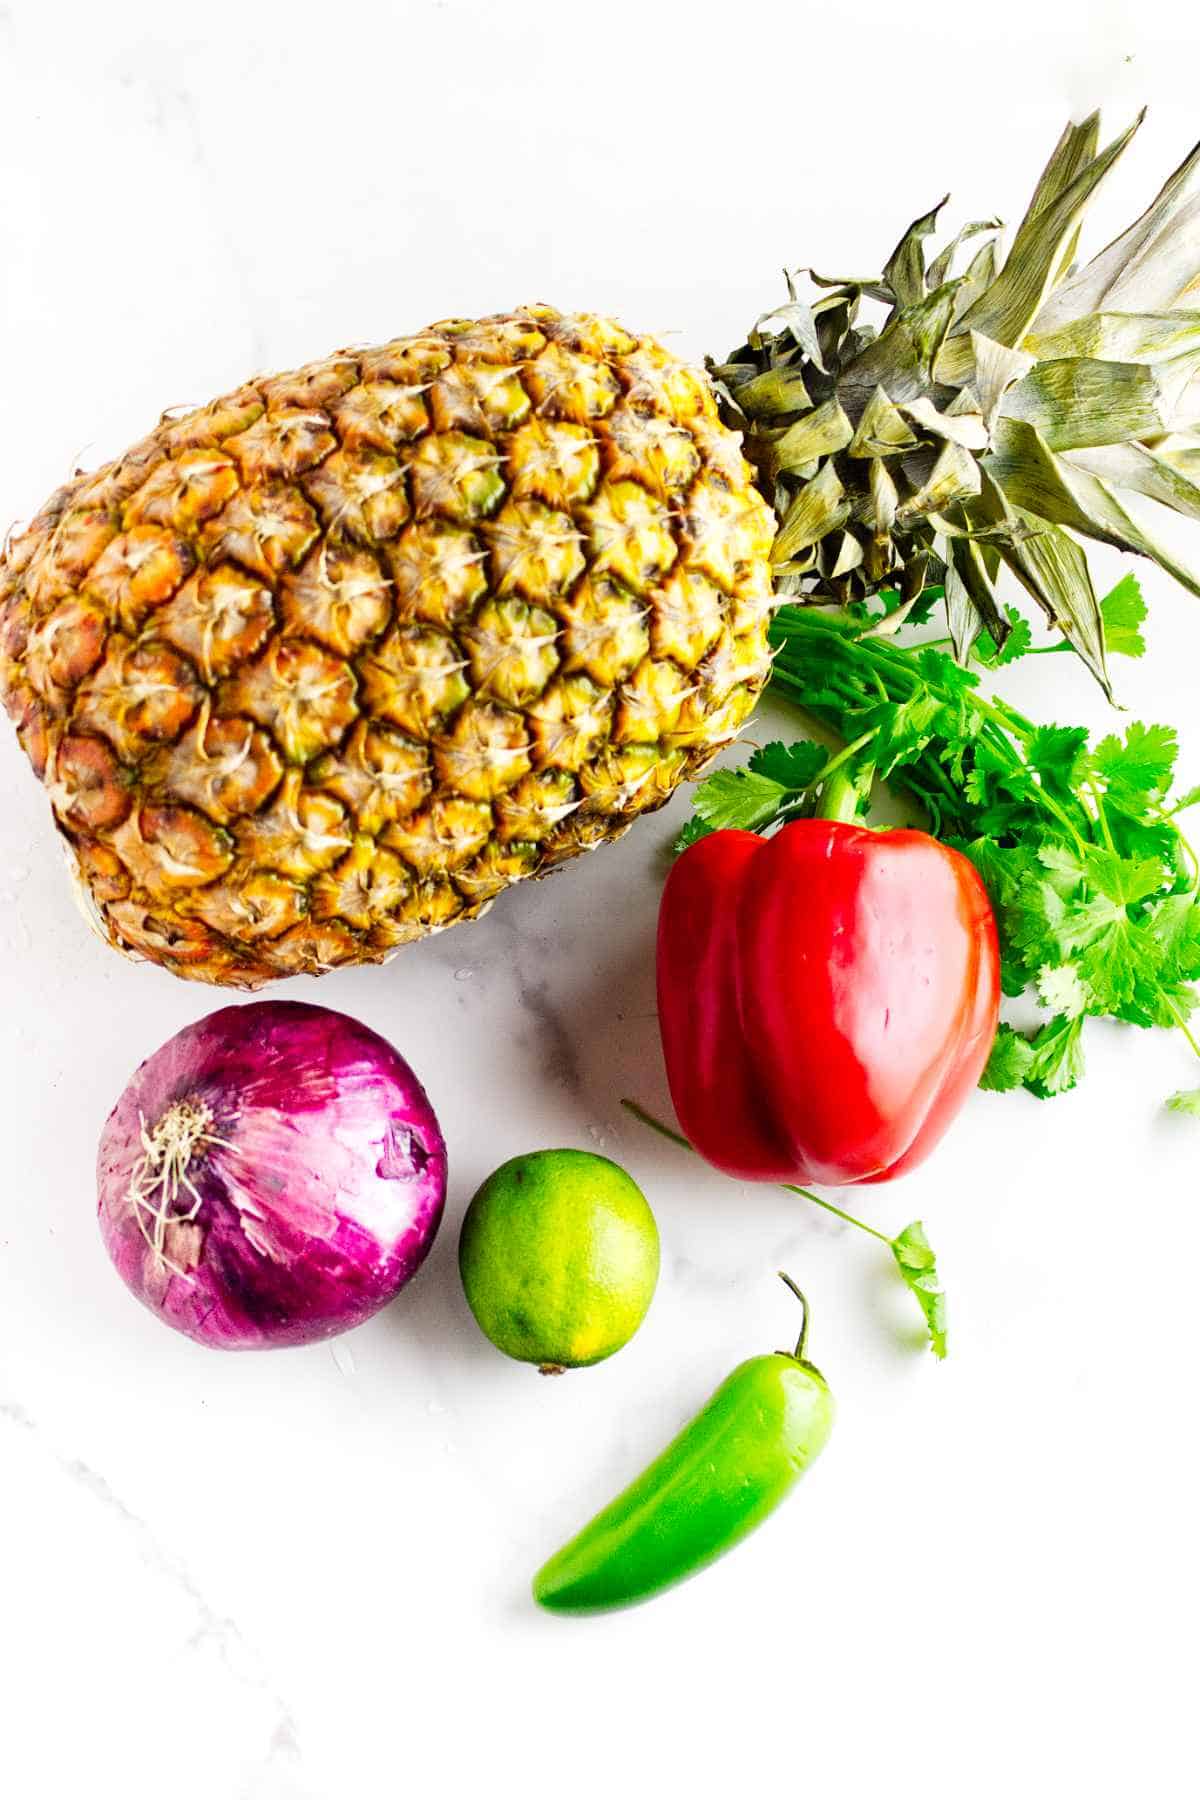 ingredients for making pineapple pico de gallo.